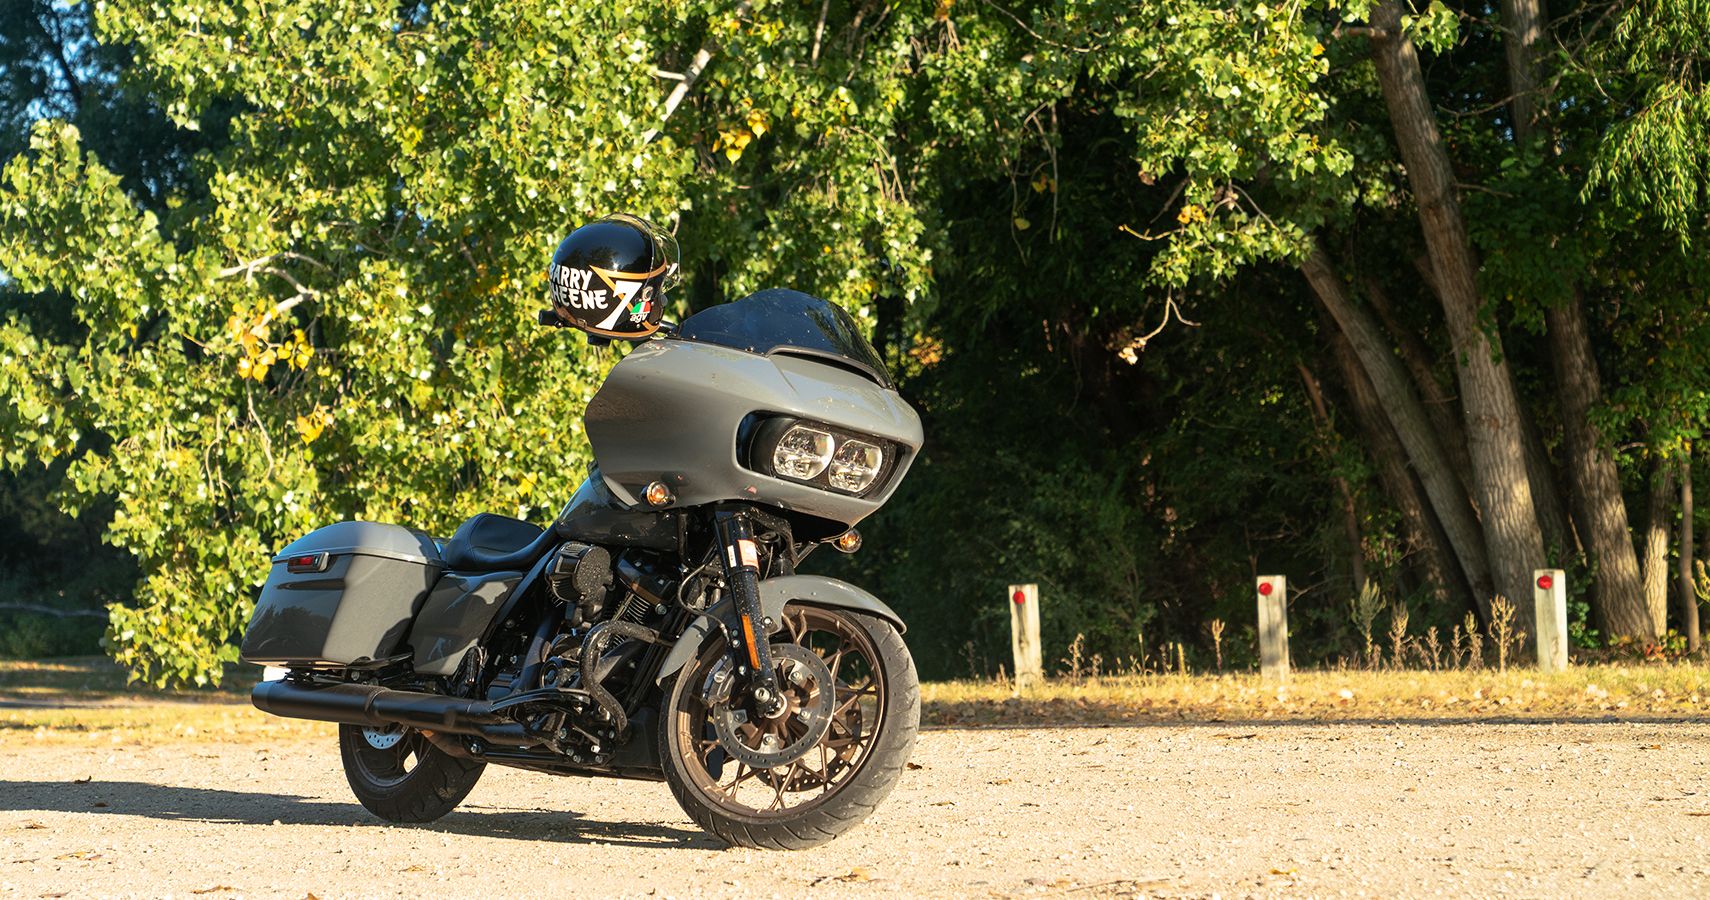 2022 Harley-Davidson Road Glide ST Review: A Battleship For The Road